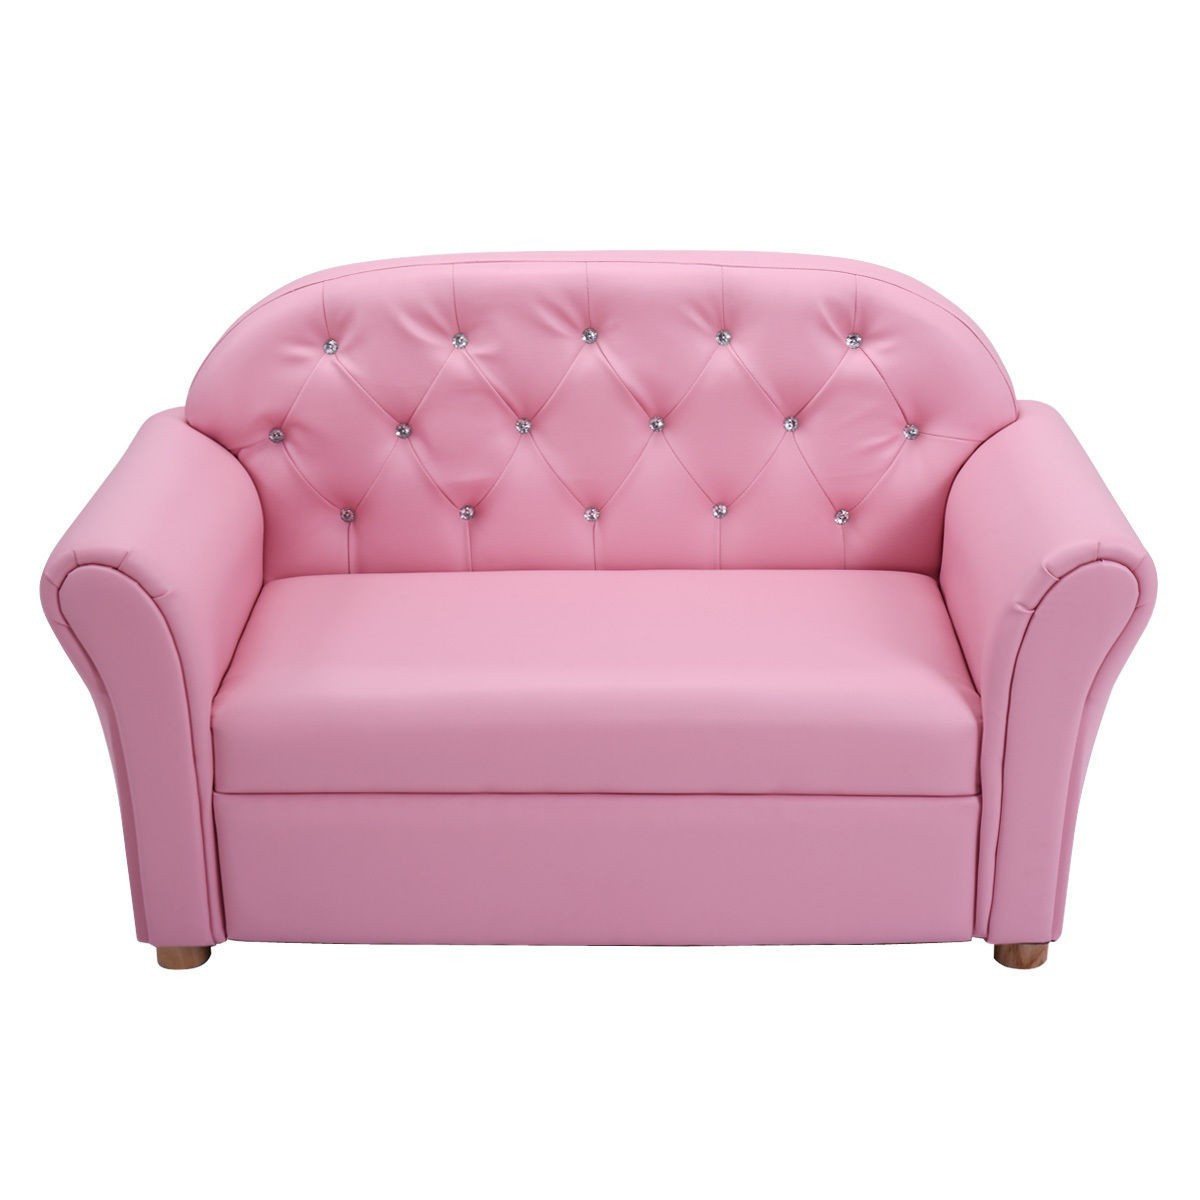 Kids Lounge Chair
 Kids Sofa Princess Armrest Chair Lounge Couch Children